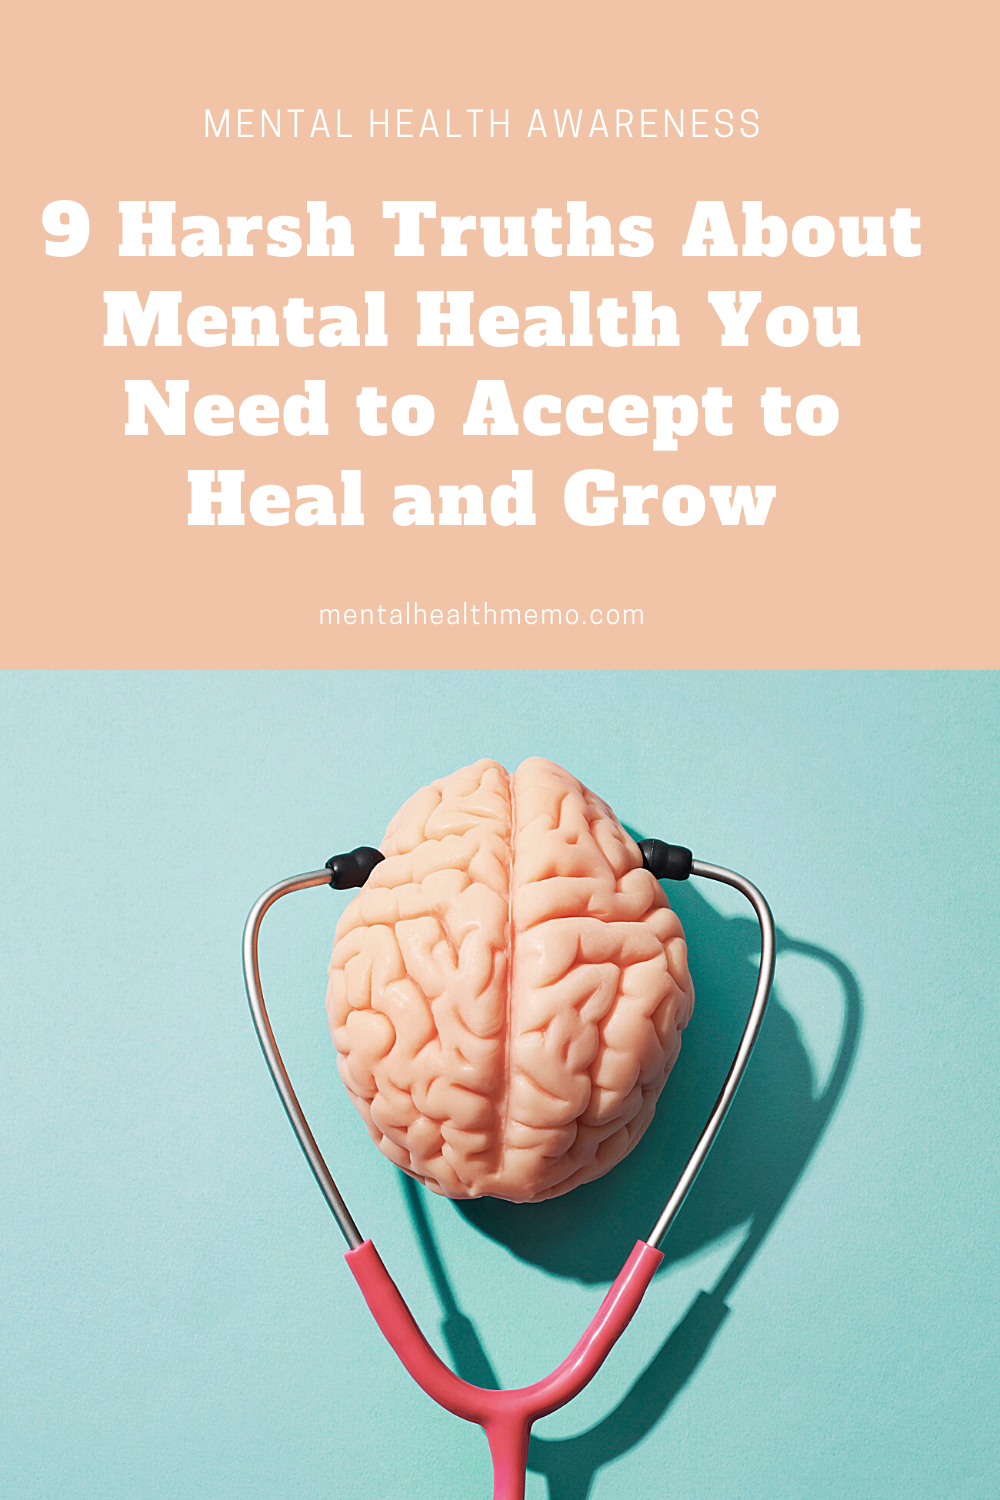 Pin: 9 harsh truths about mental health you need to accept to heal